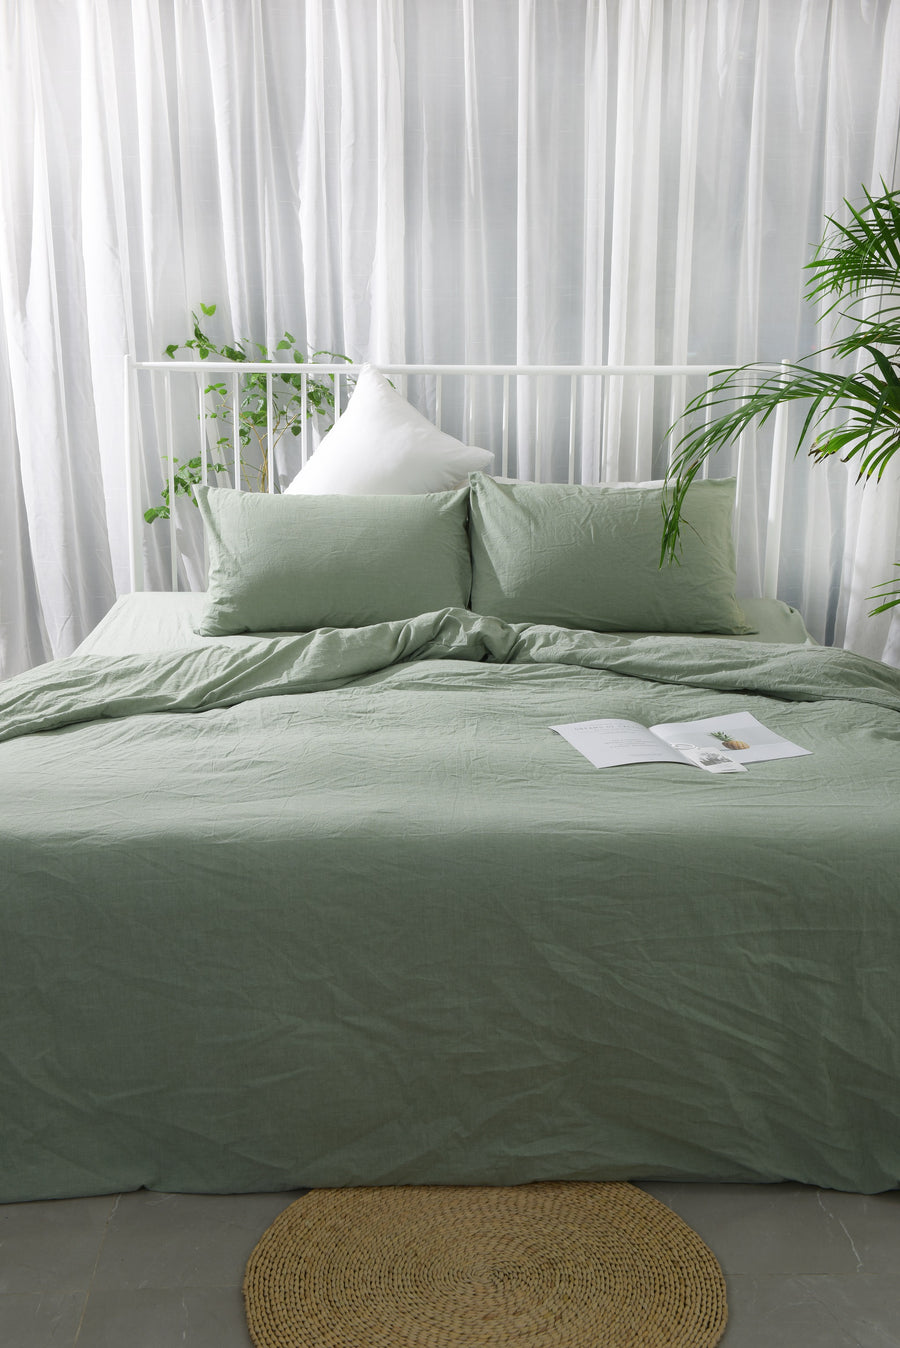 Vette Q 4-pc Fitted Sheet Set (Spring Green)